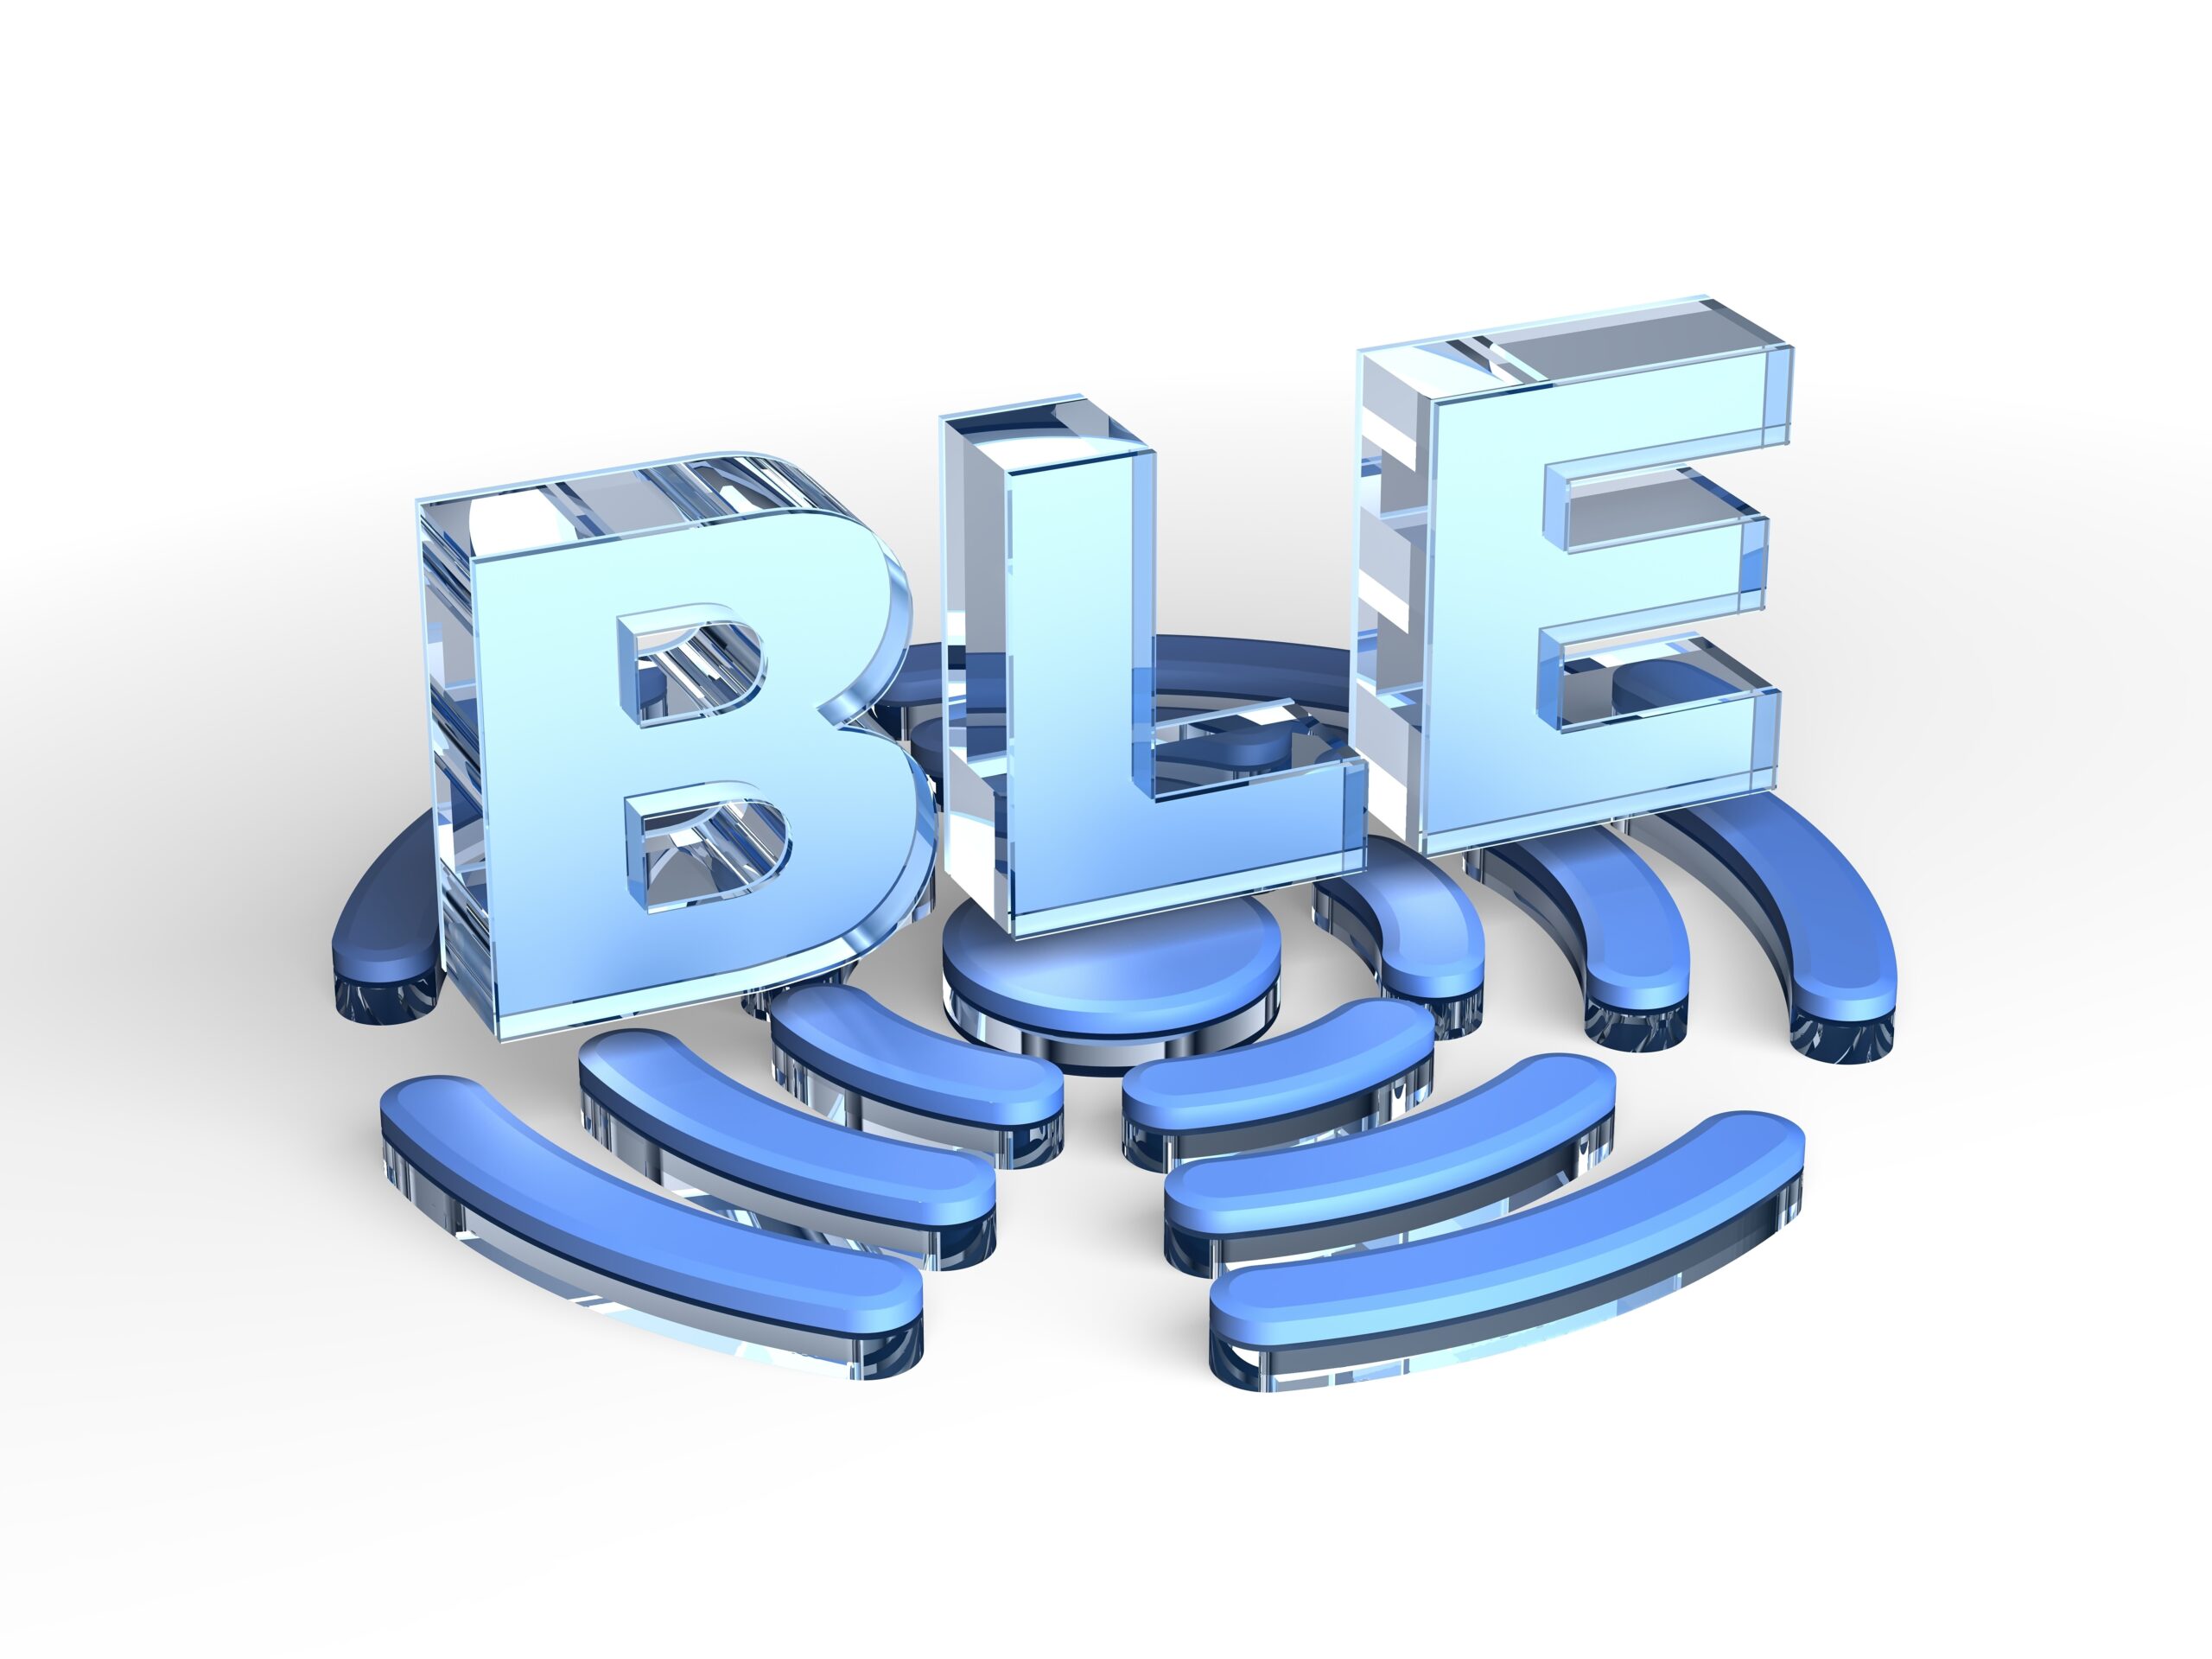 3D illustration of the acronym "BLE" (Bluetooth Low Energy) in metallic blue letters, positioned above stylized wireless signal waves, representing BLE technology for efficient wireless communication.